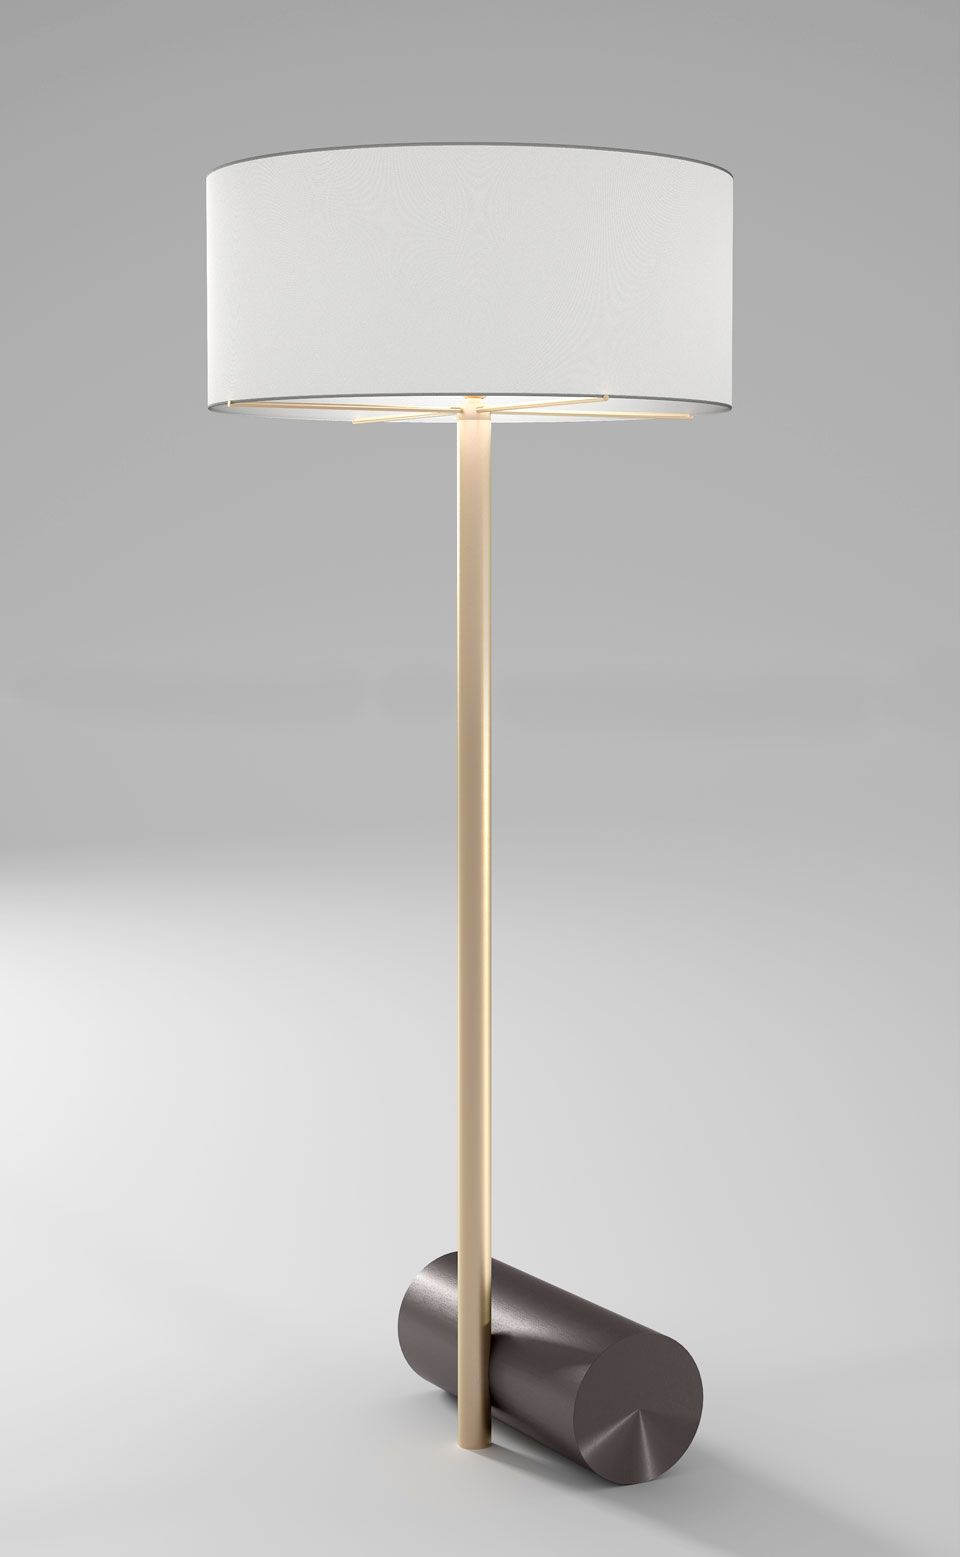 Calée Xl Large Floor Lamp, Cylindrical Base, Satin Brass And Graphite Cvl  Luminaires – Contemporary Lighting, Made In France, Massive Brass – Réf.  17120020 Intended For Satin Brass Floor Lamps (Photo 14 of 15)